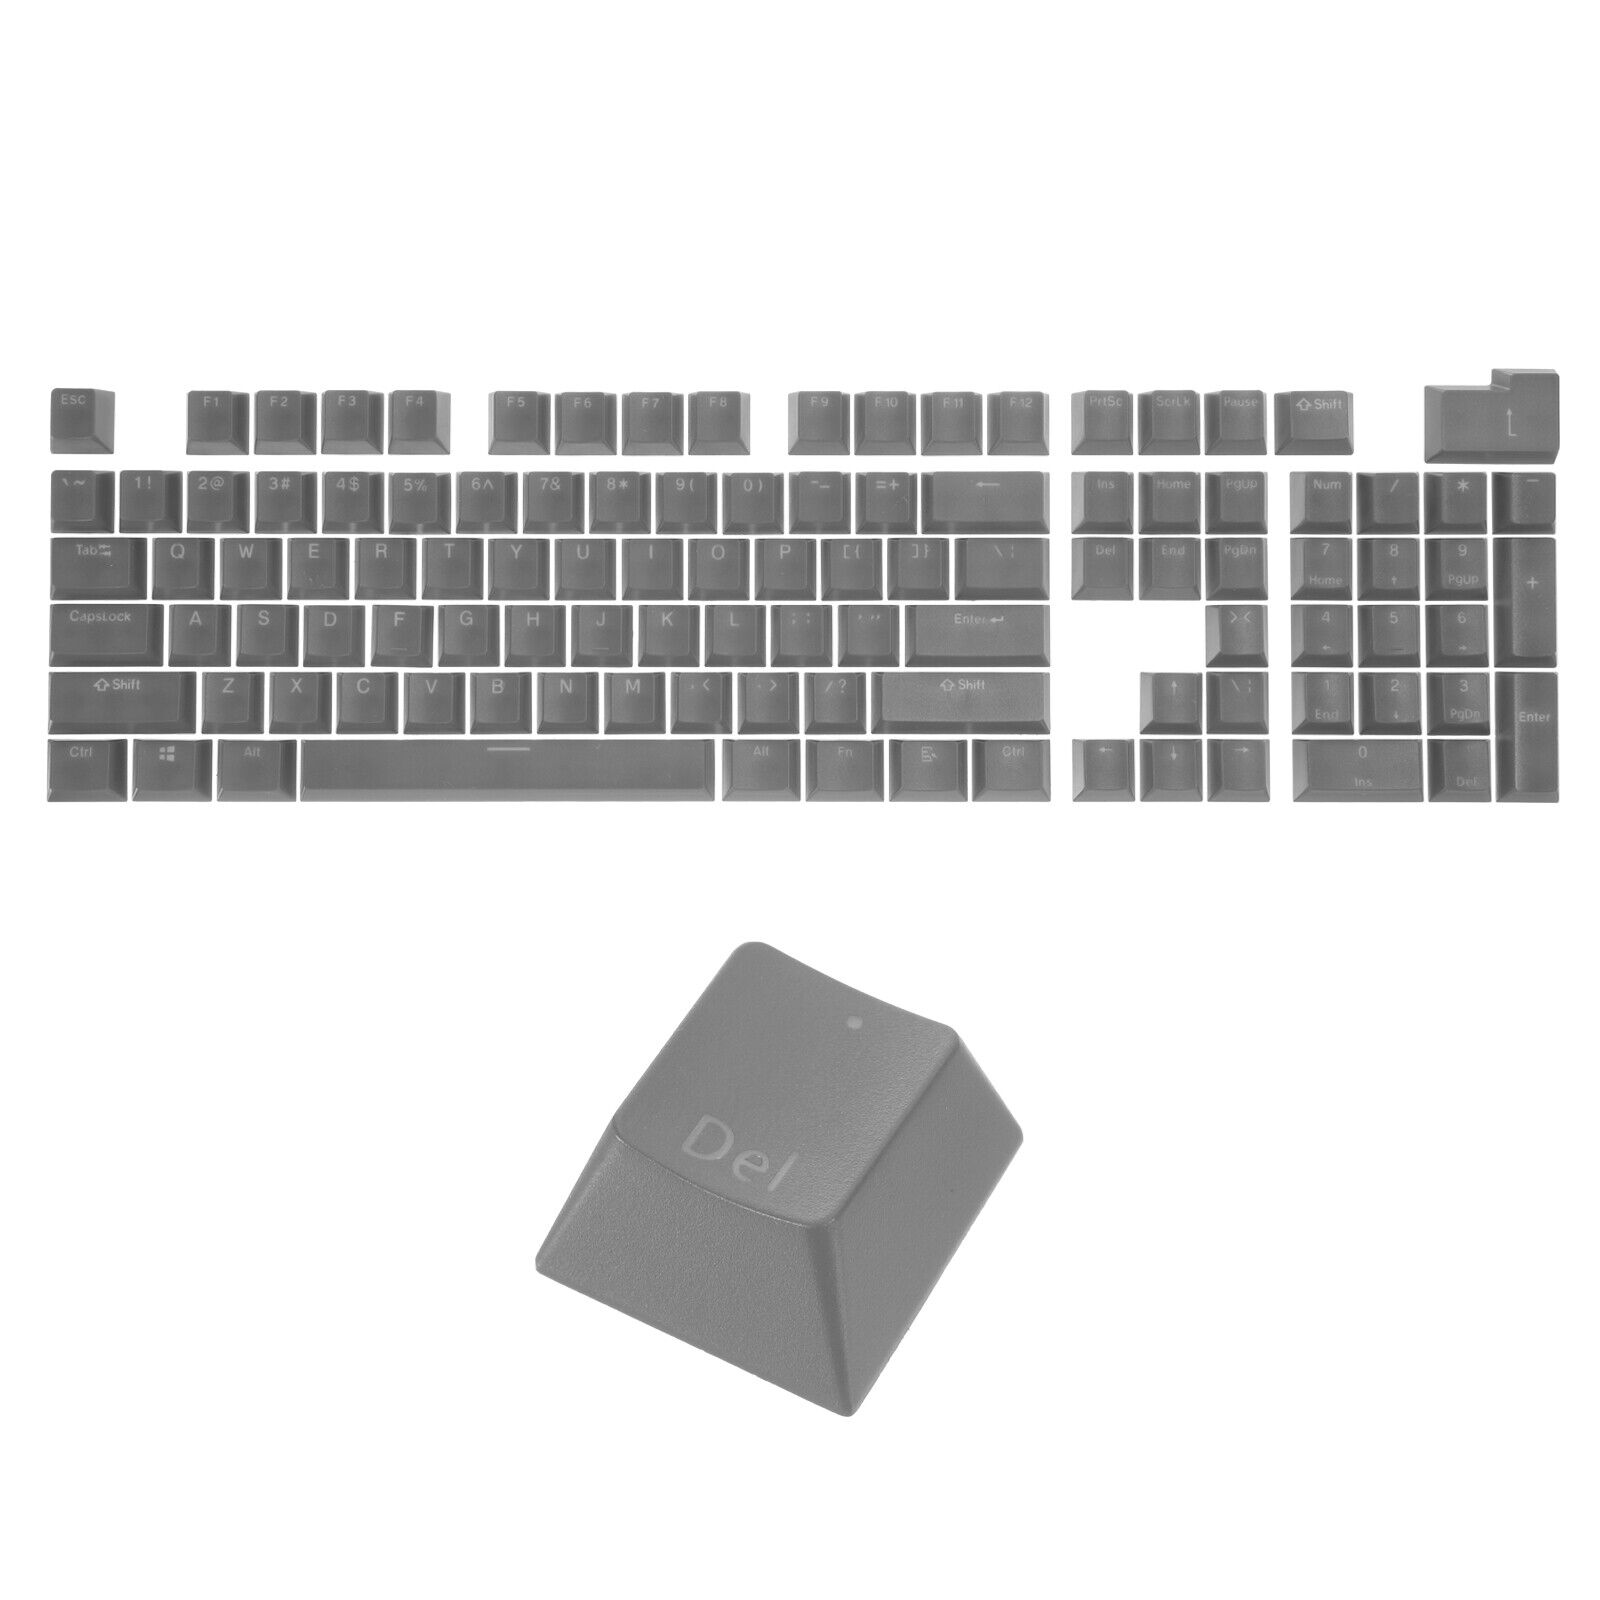 108 Keys Pudding Keycaps Set ABS for Mechanical Keyboard Layout, Grey